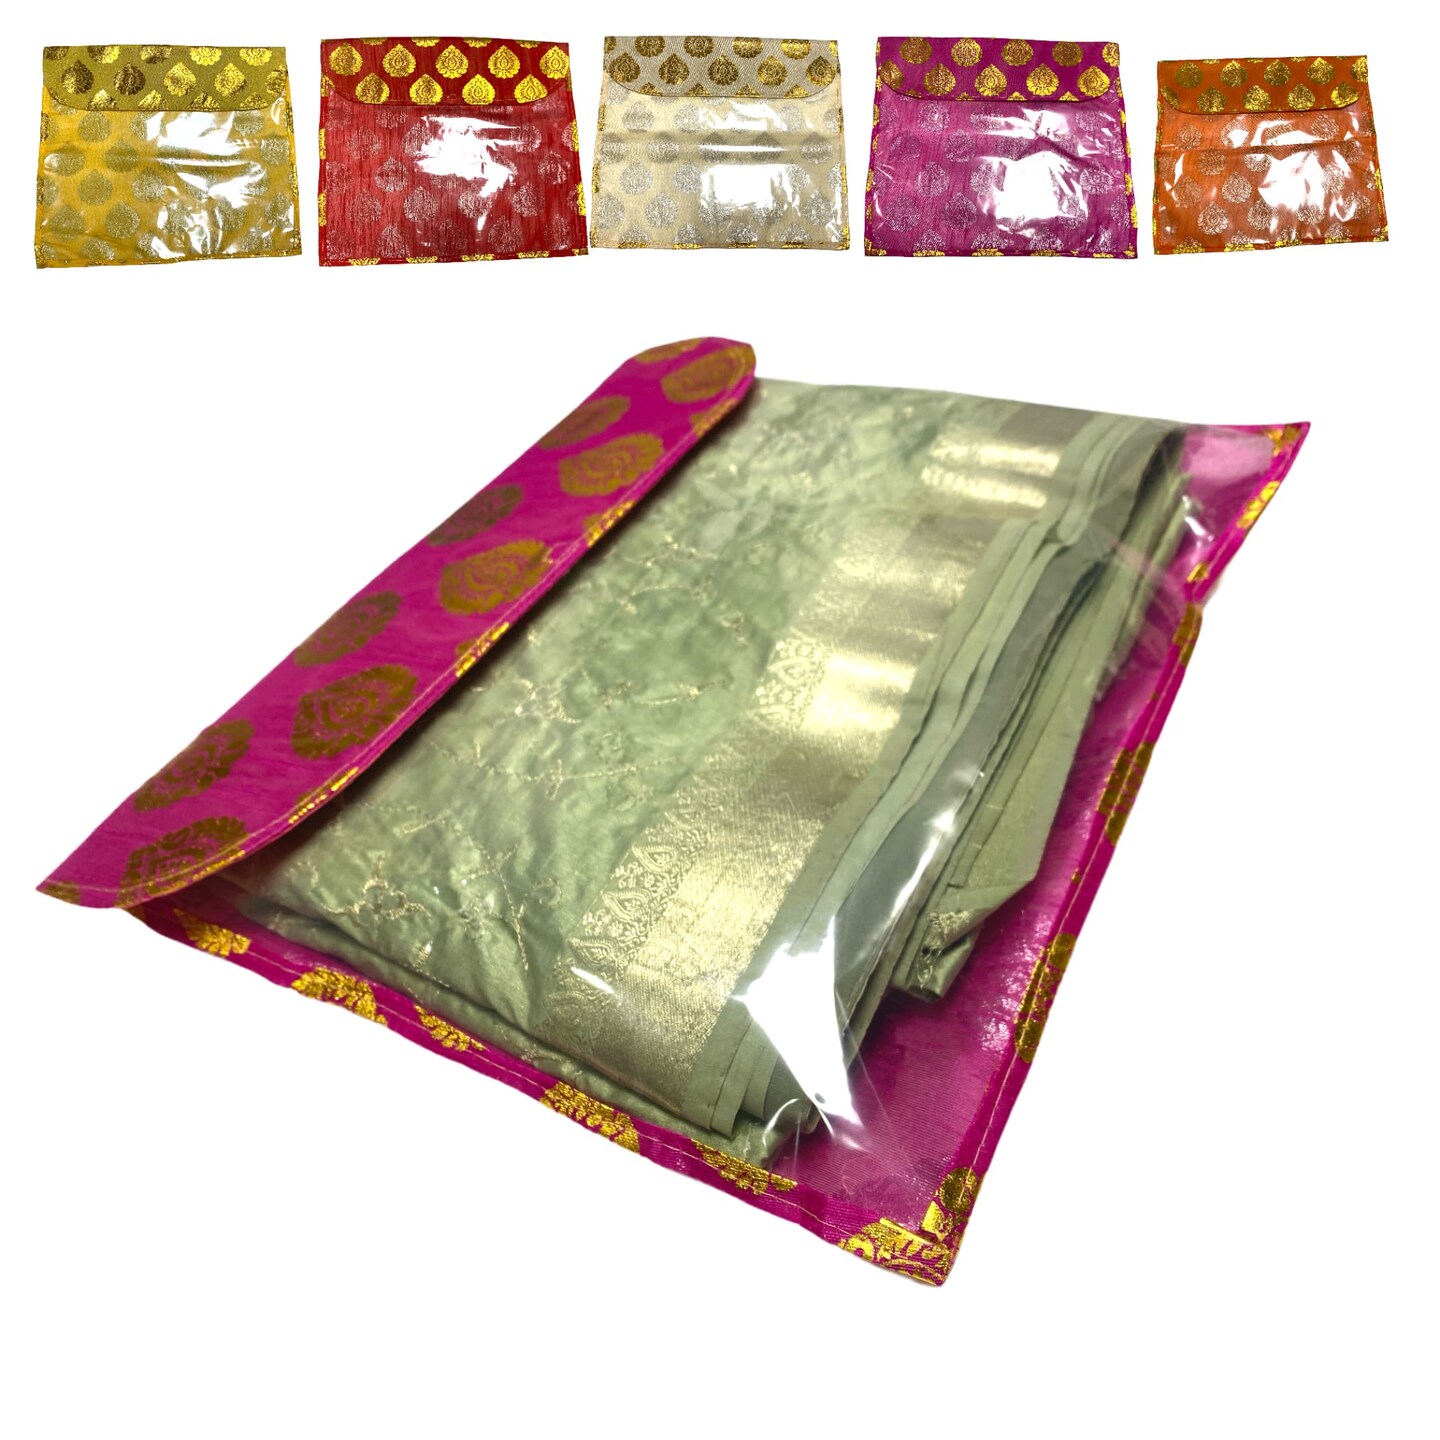 Saree Packing Cover/Bag in Erode at best price by Jaimin Craft - Justdial